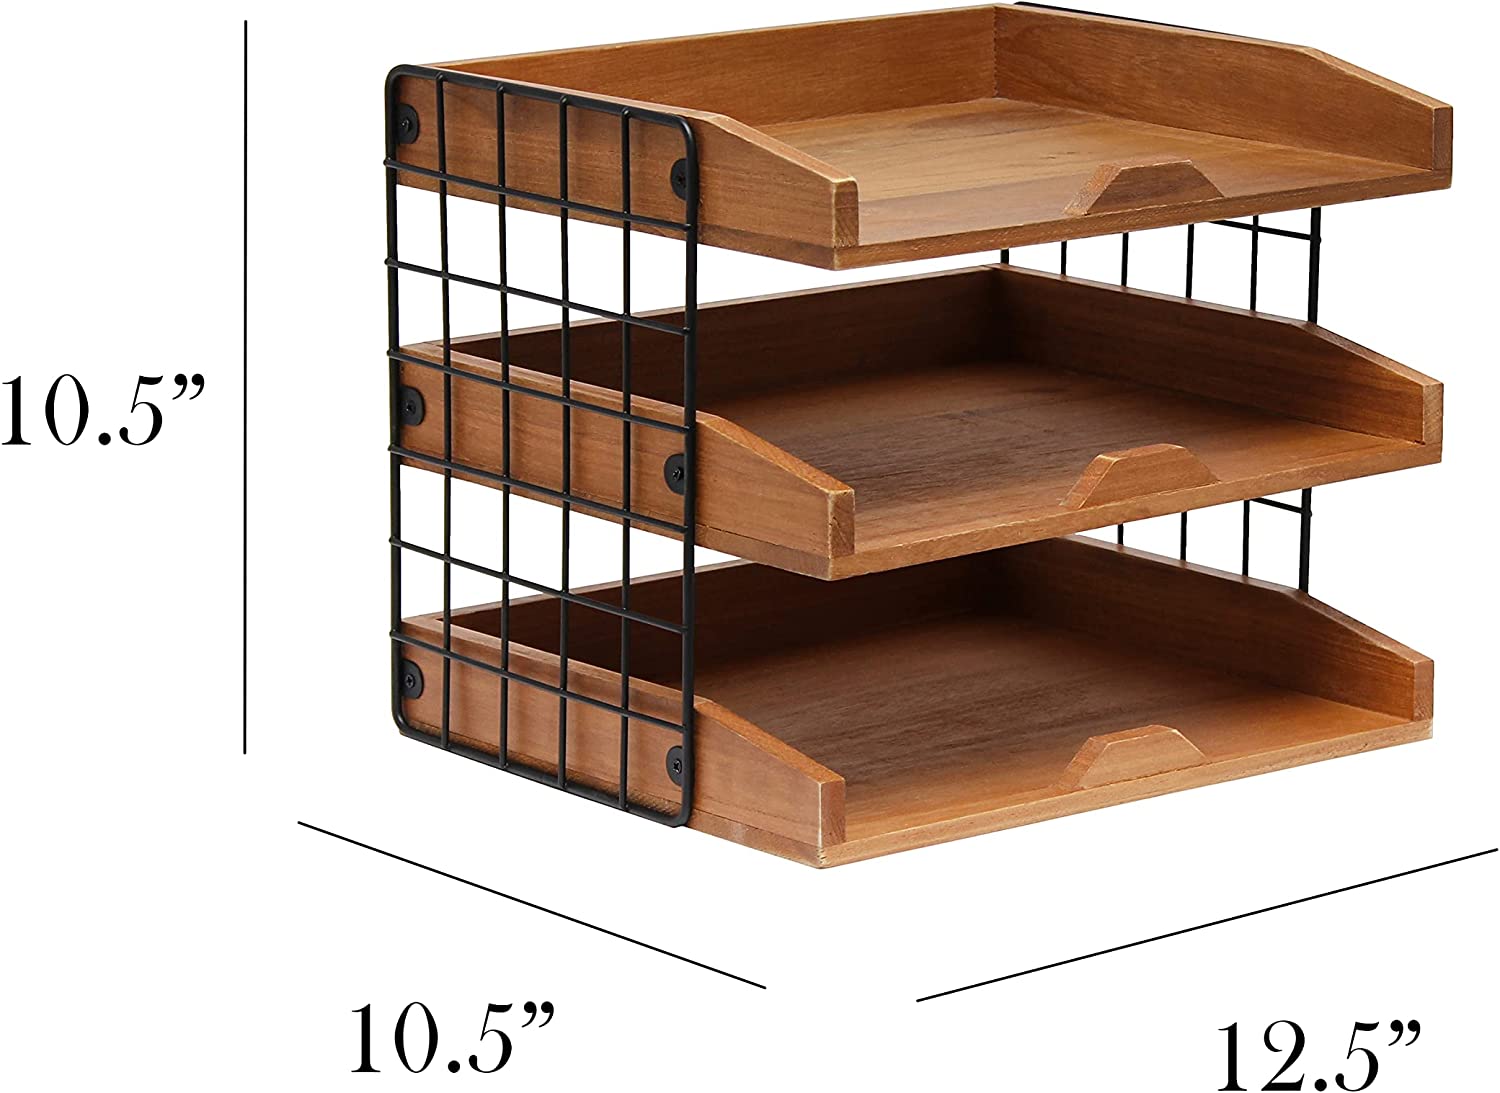 Elegant Designs HG1022-NWD Home Office Wood Desk Organizer Mail Letter Tray with 3 Shelves, Natural Wood